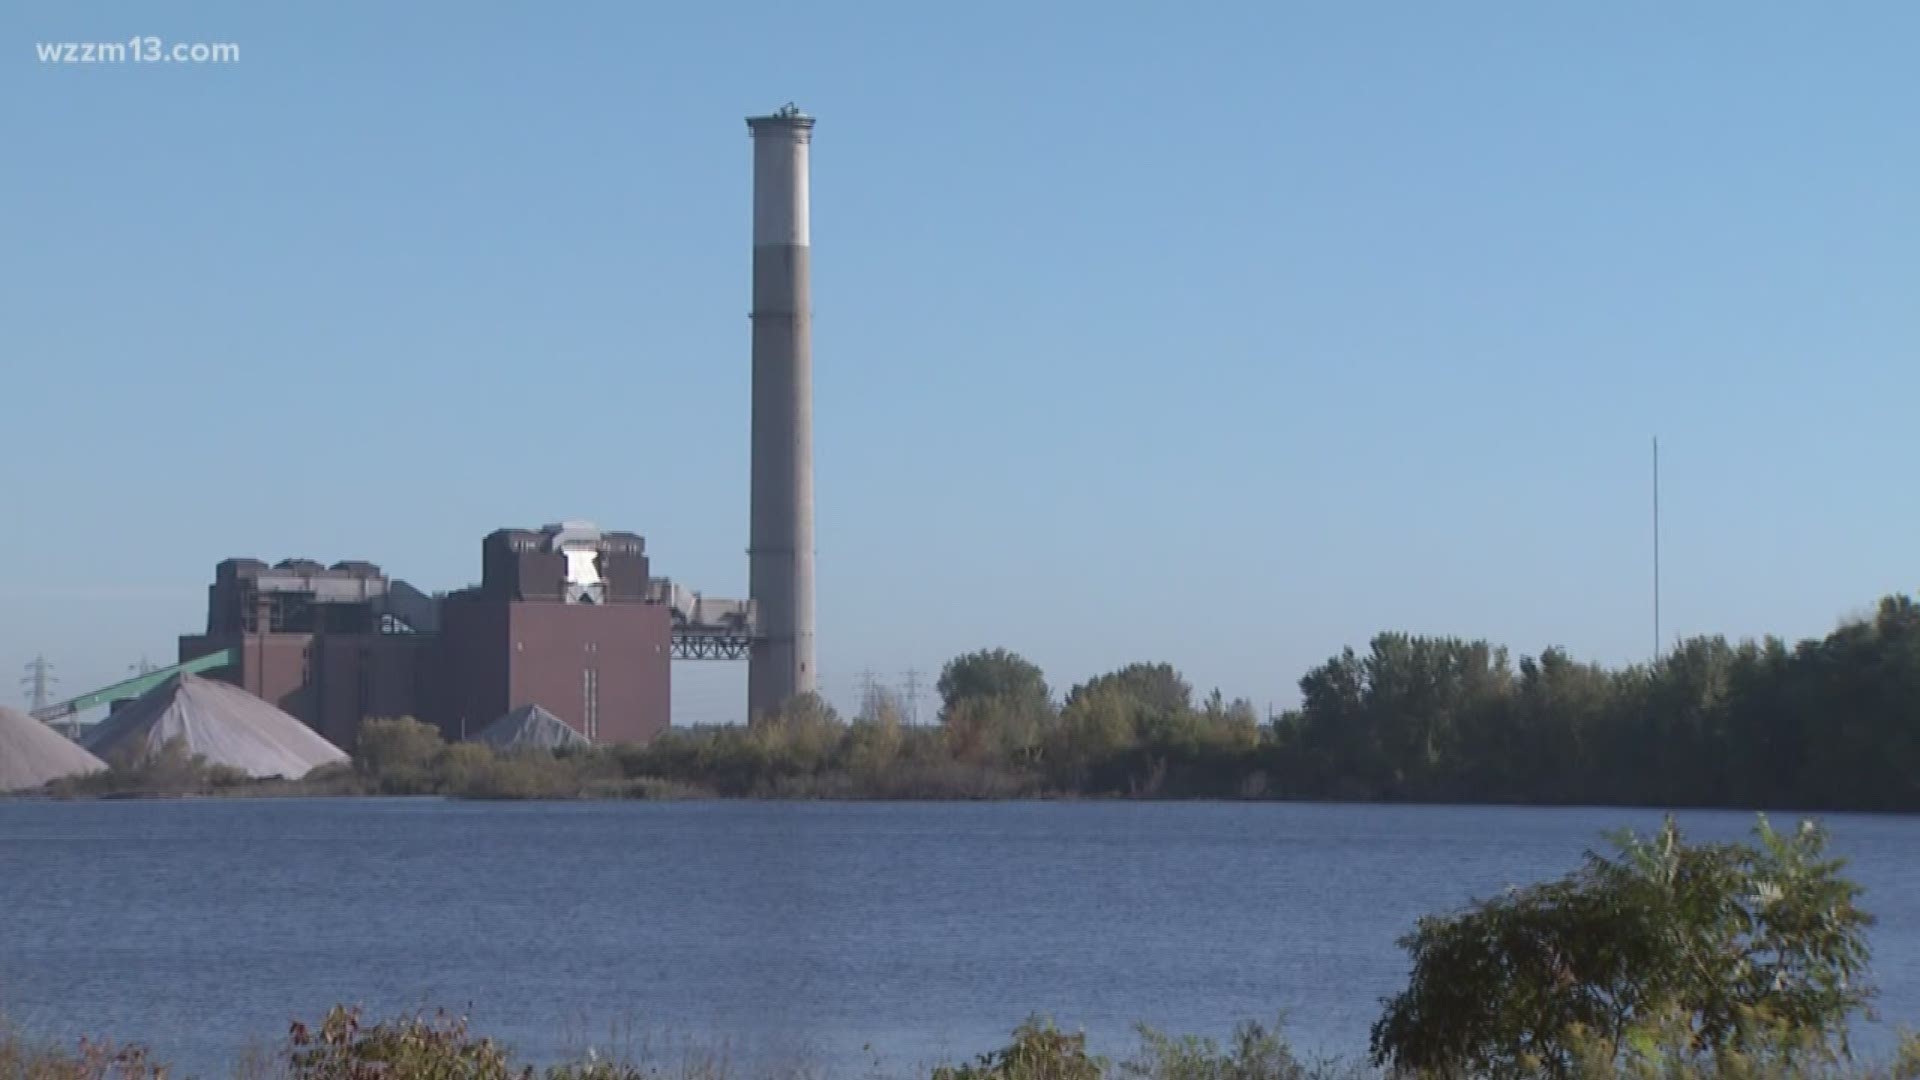 B.C. Cobb smoke stack is being slowly dismantled